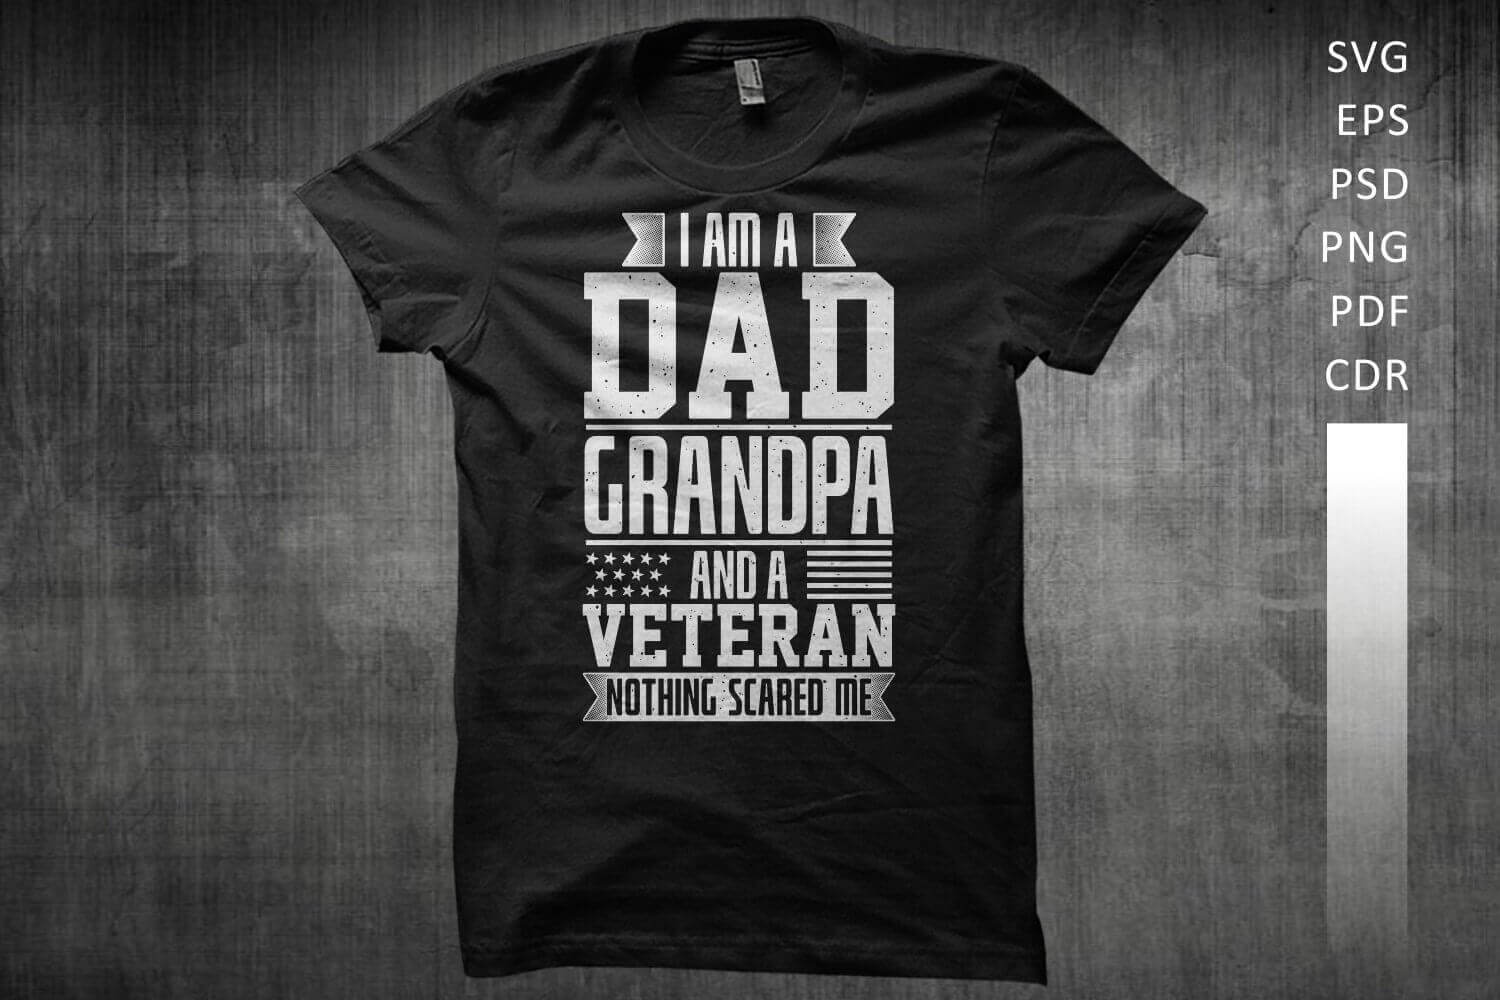 Black T-shirt with black and white slogan "I'm a dad, a grandfather and a veteran, nothing scared me."